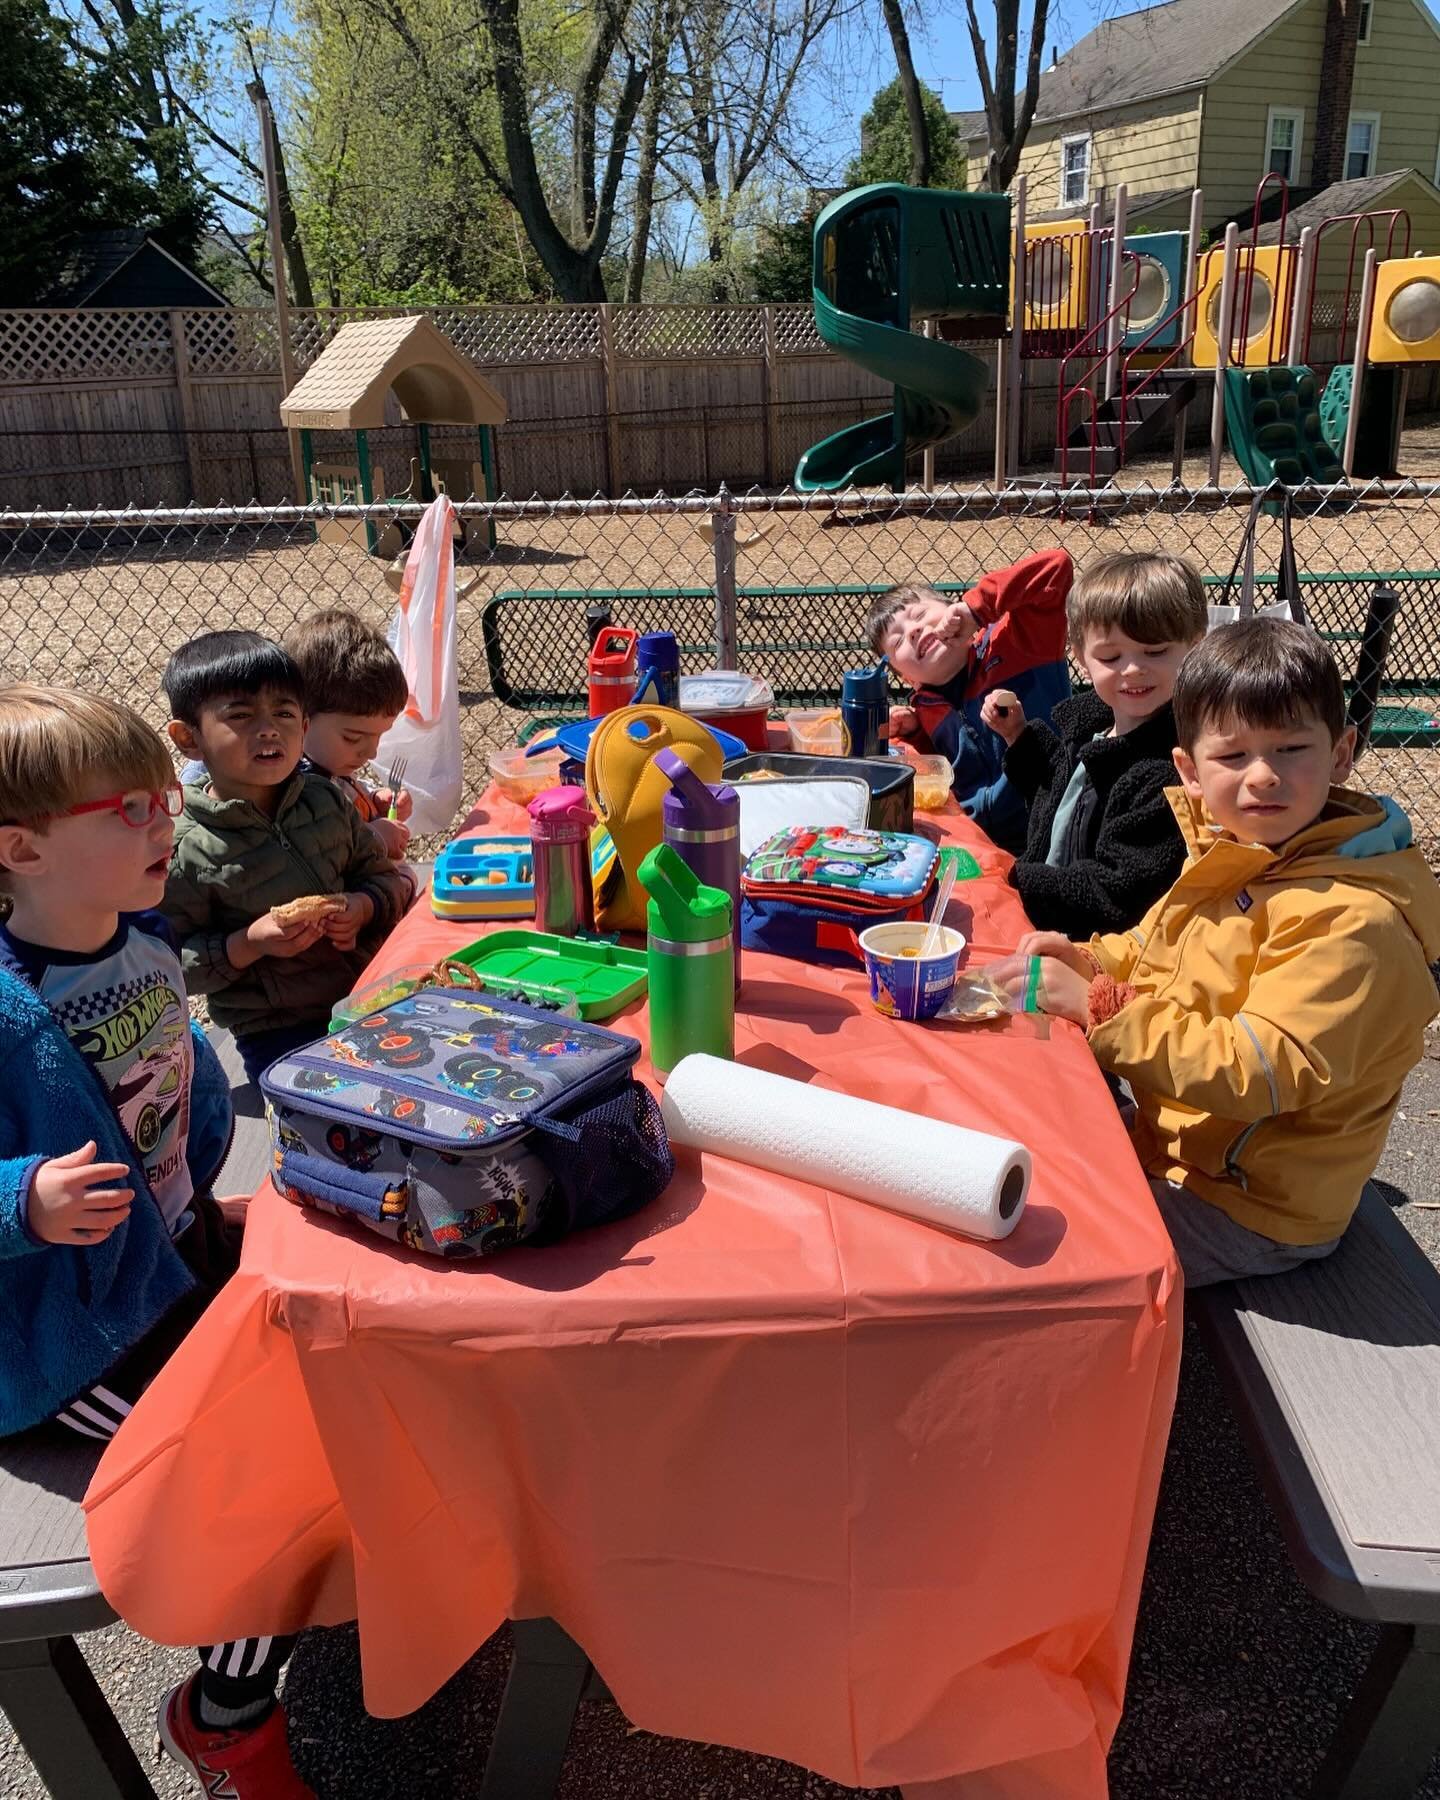 In this classroom, we dream big, play hard, and learn together! 🐯 🌈✏️ #foundationsprepschool #foundationsprep #tigeroneclass #funandlearning #springtimefun #science #handsonlearningfun